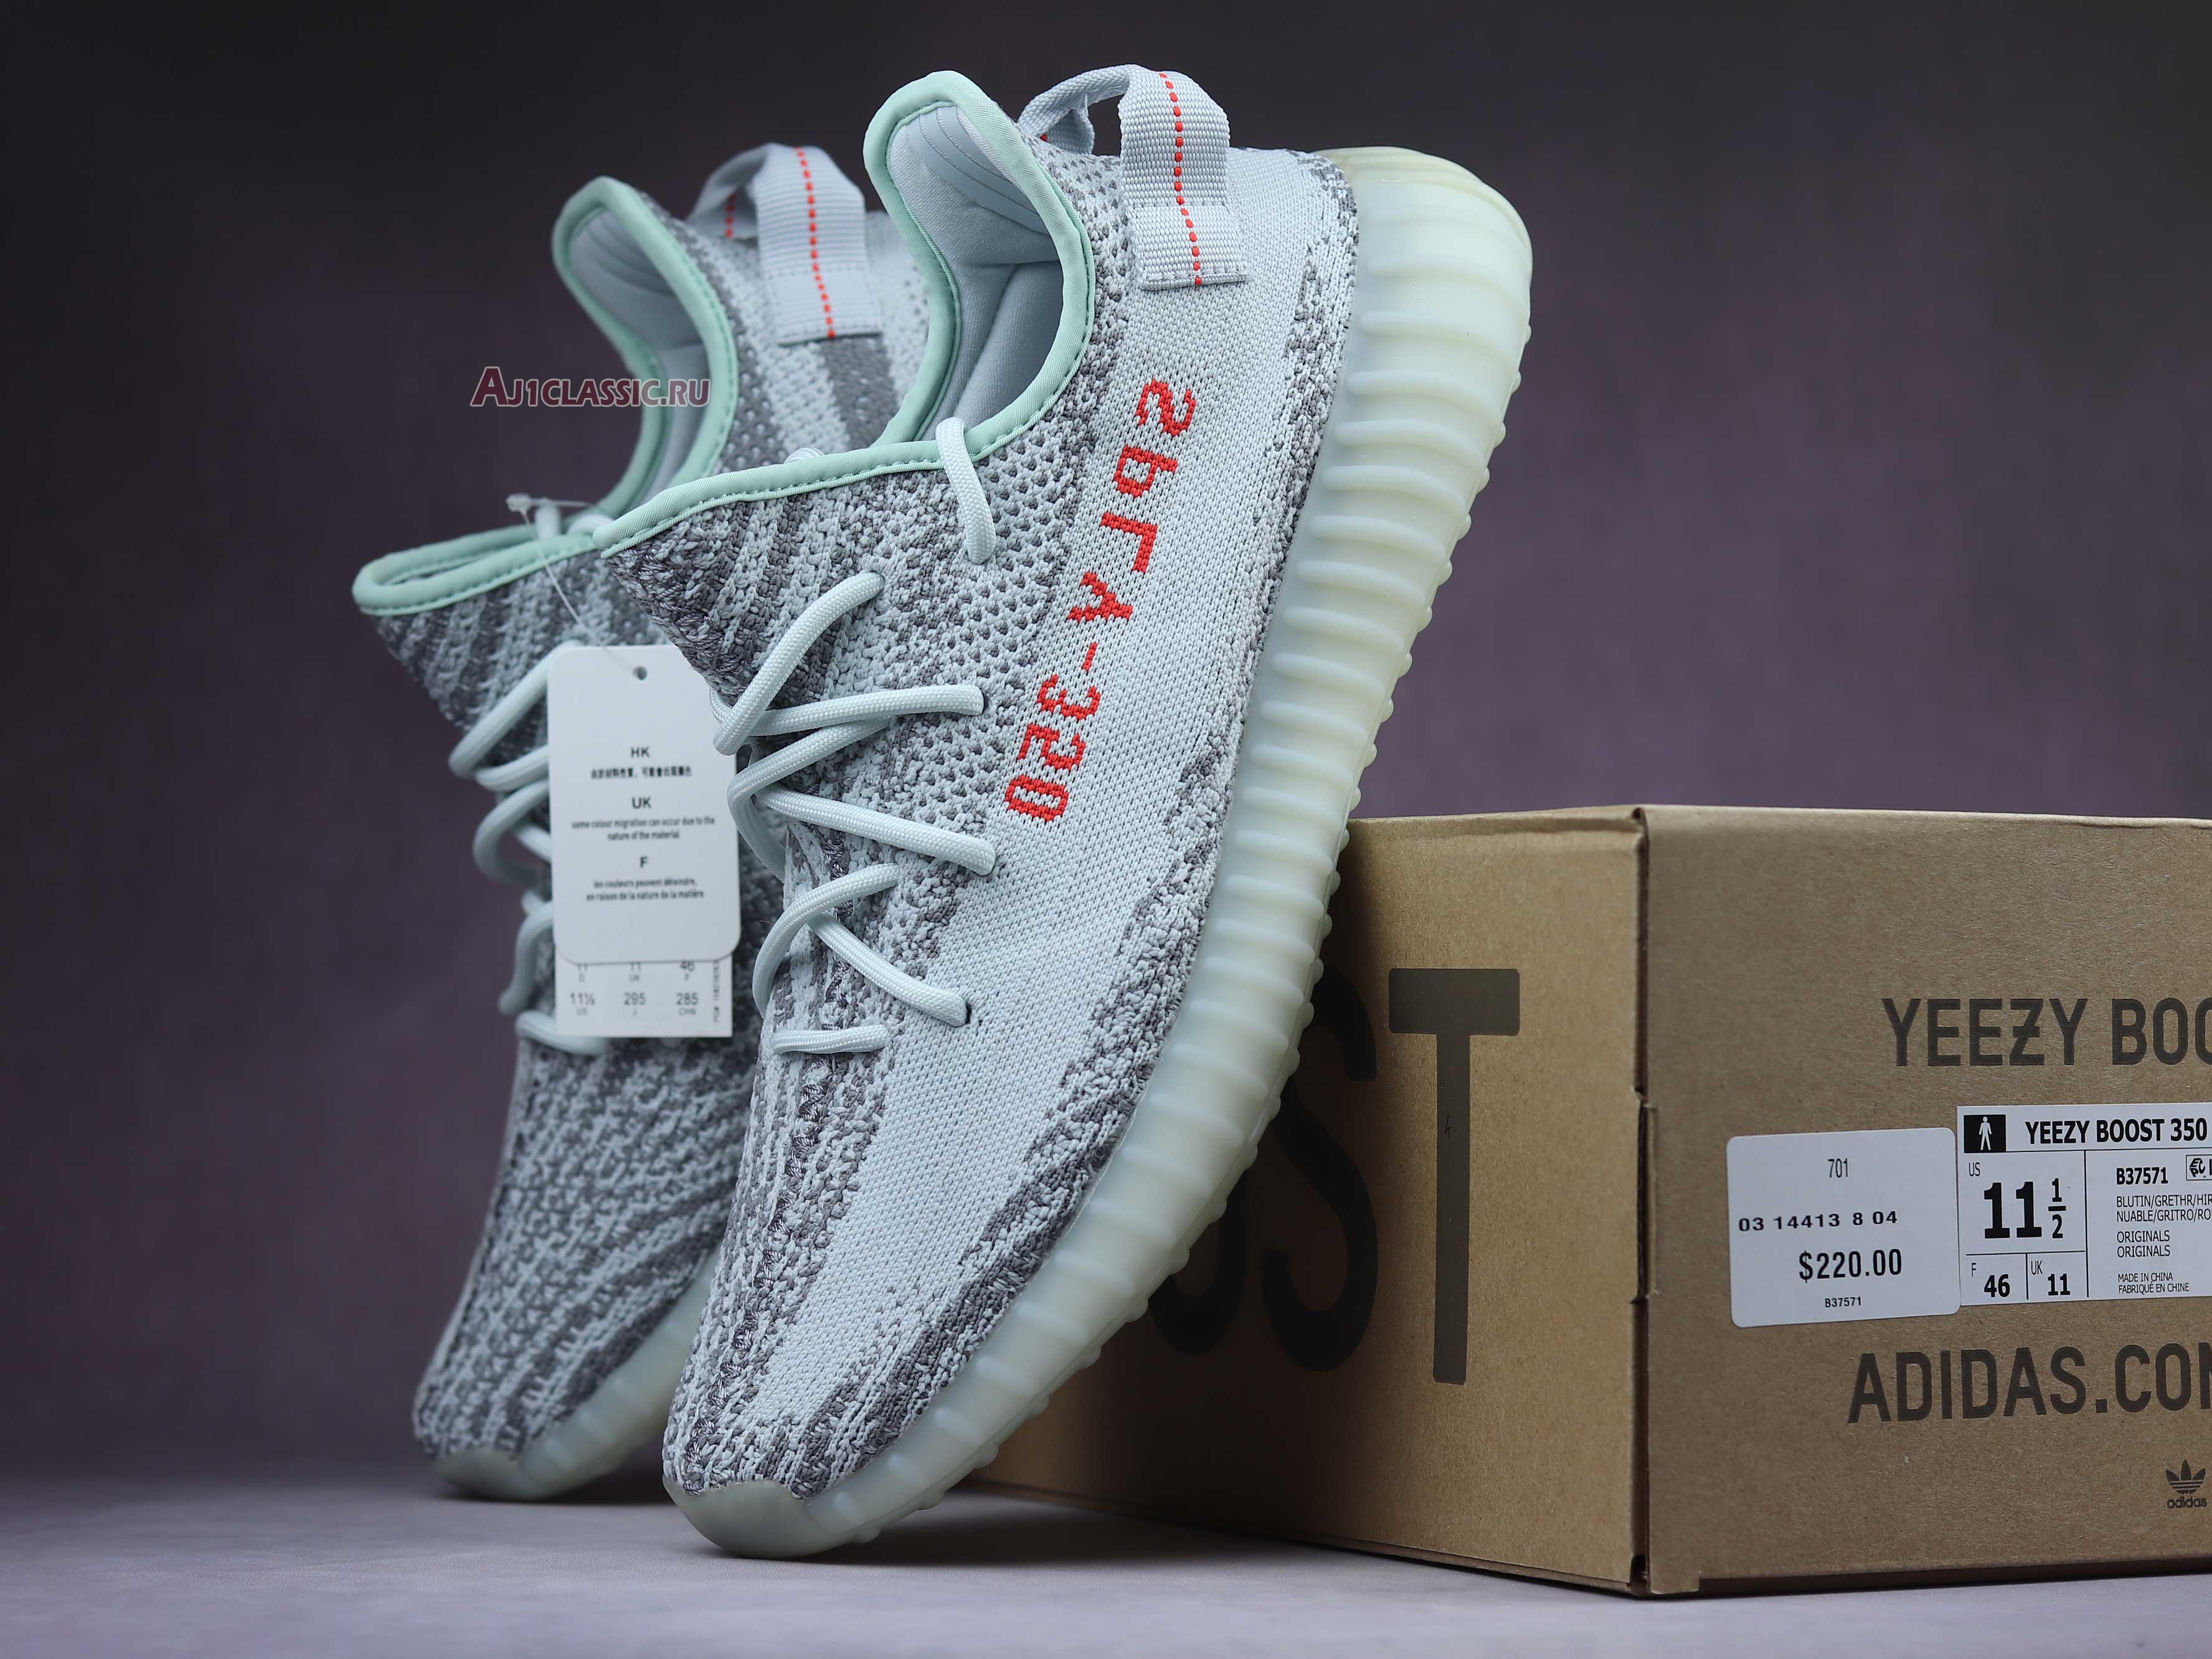 Adidas Yeezy Boost 350 V2 Blue Tint B37571 Blue Tint/Grey Three/High Resolution Red Sneakers